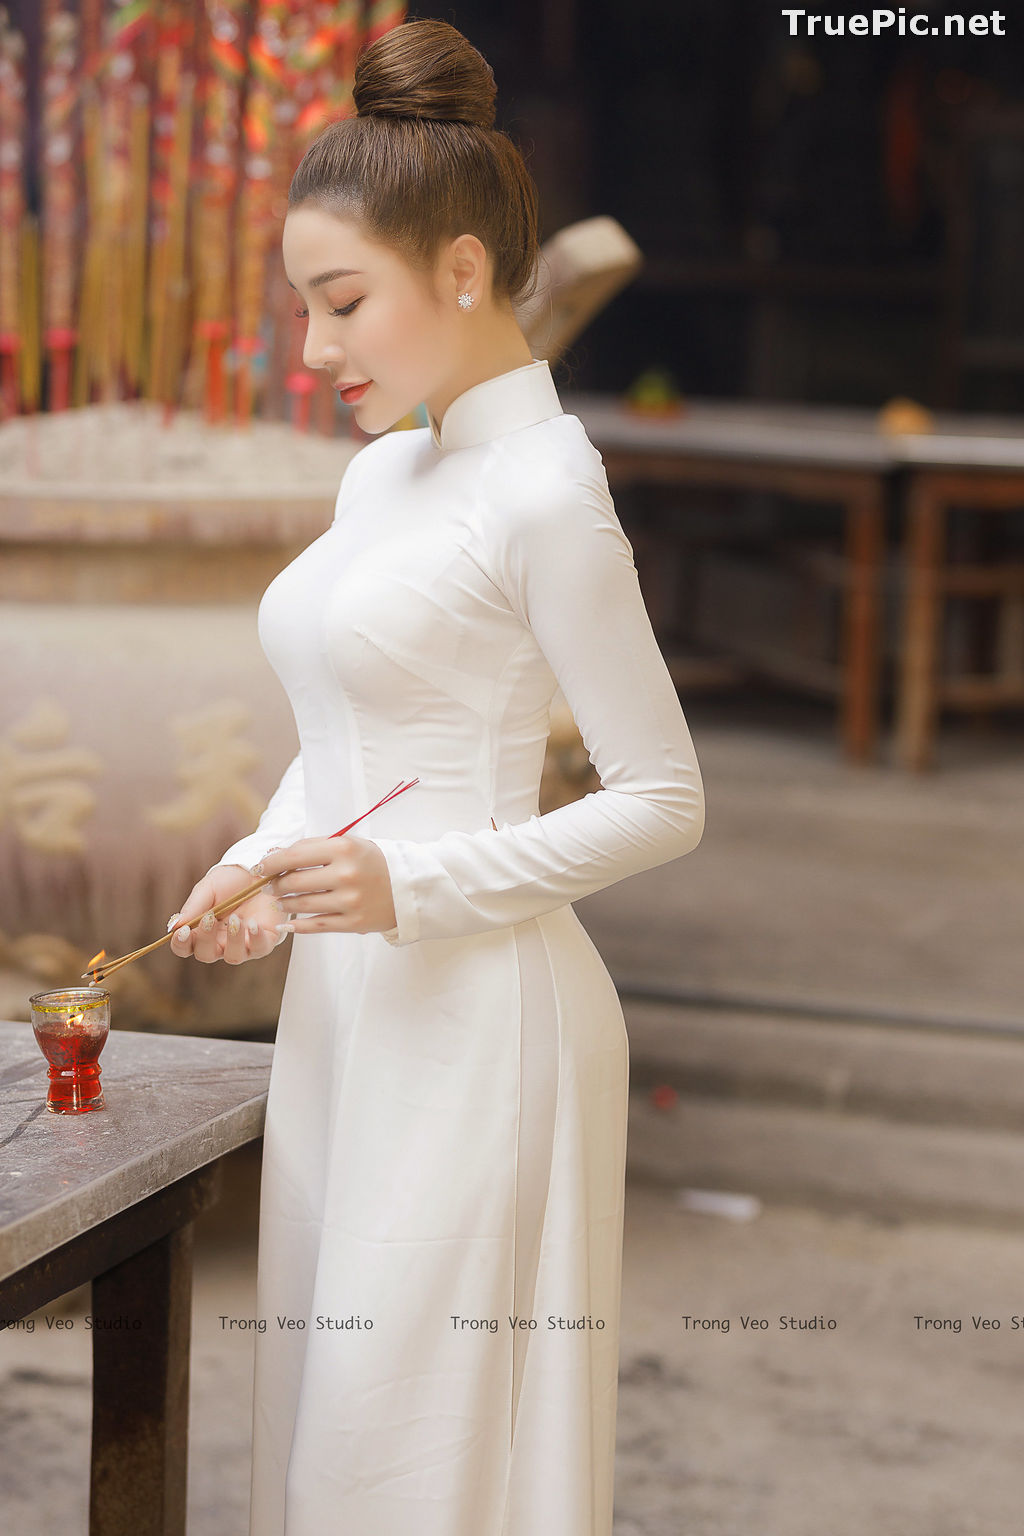 Image The Beauty of Vietnamese Girls with Traditional Dress (Ao Dai) #2 - TruePic.net - Picture-37